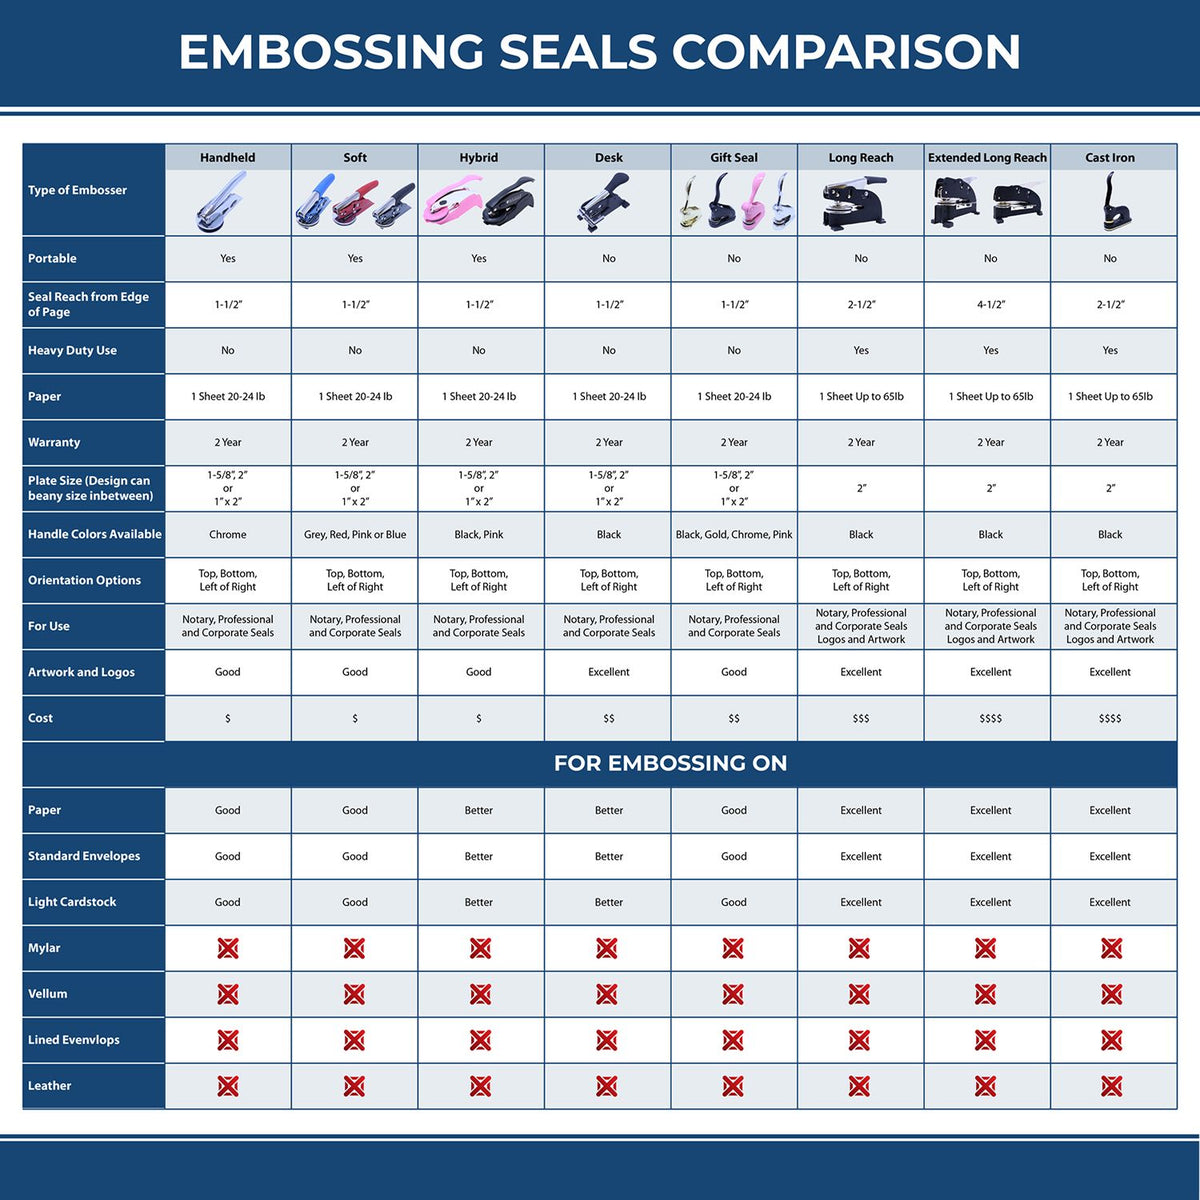 A comparison chart for the different types of mount models available for the Hybrid Guam Engineer Seal